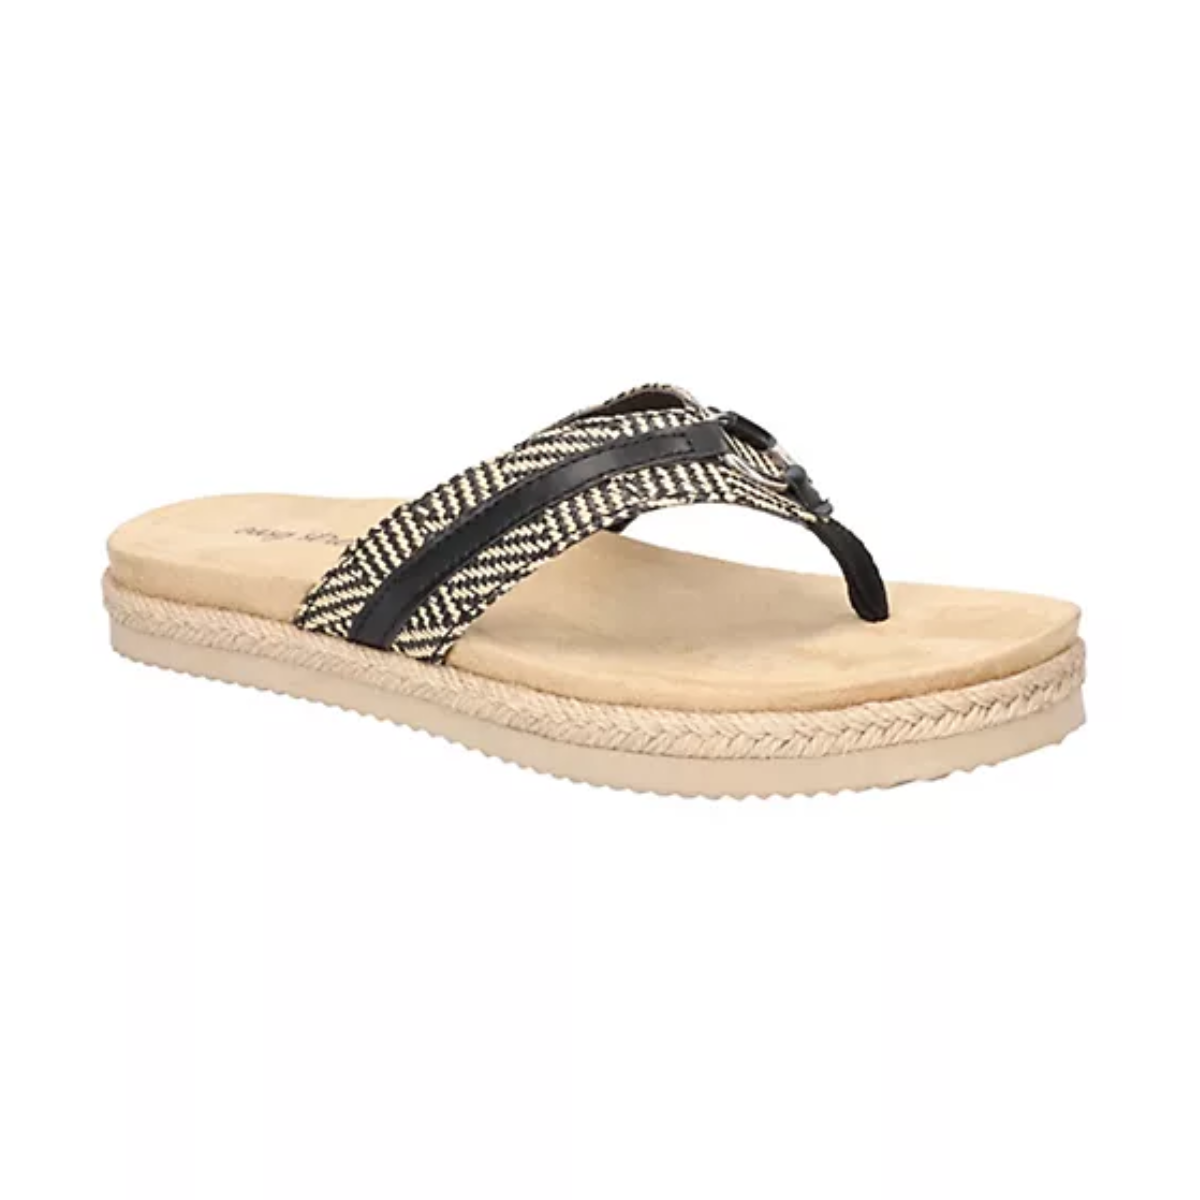 The Starling Woven in Black by Easy Street thong sandal is a stylish women's flip flop with a comfortable braided strap, adding a fashionable accent to any outfit.